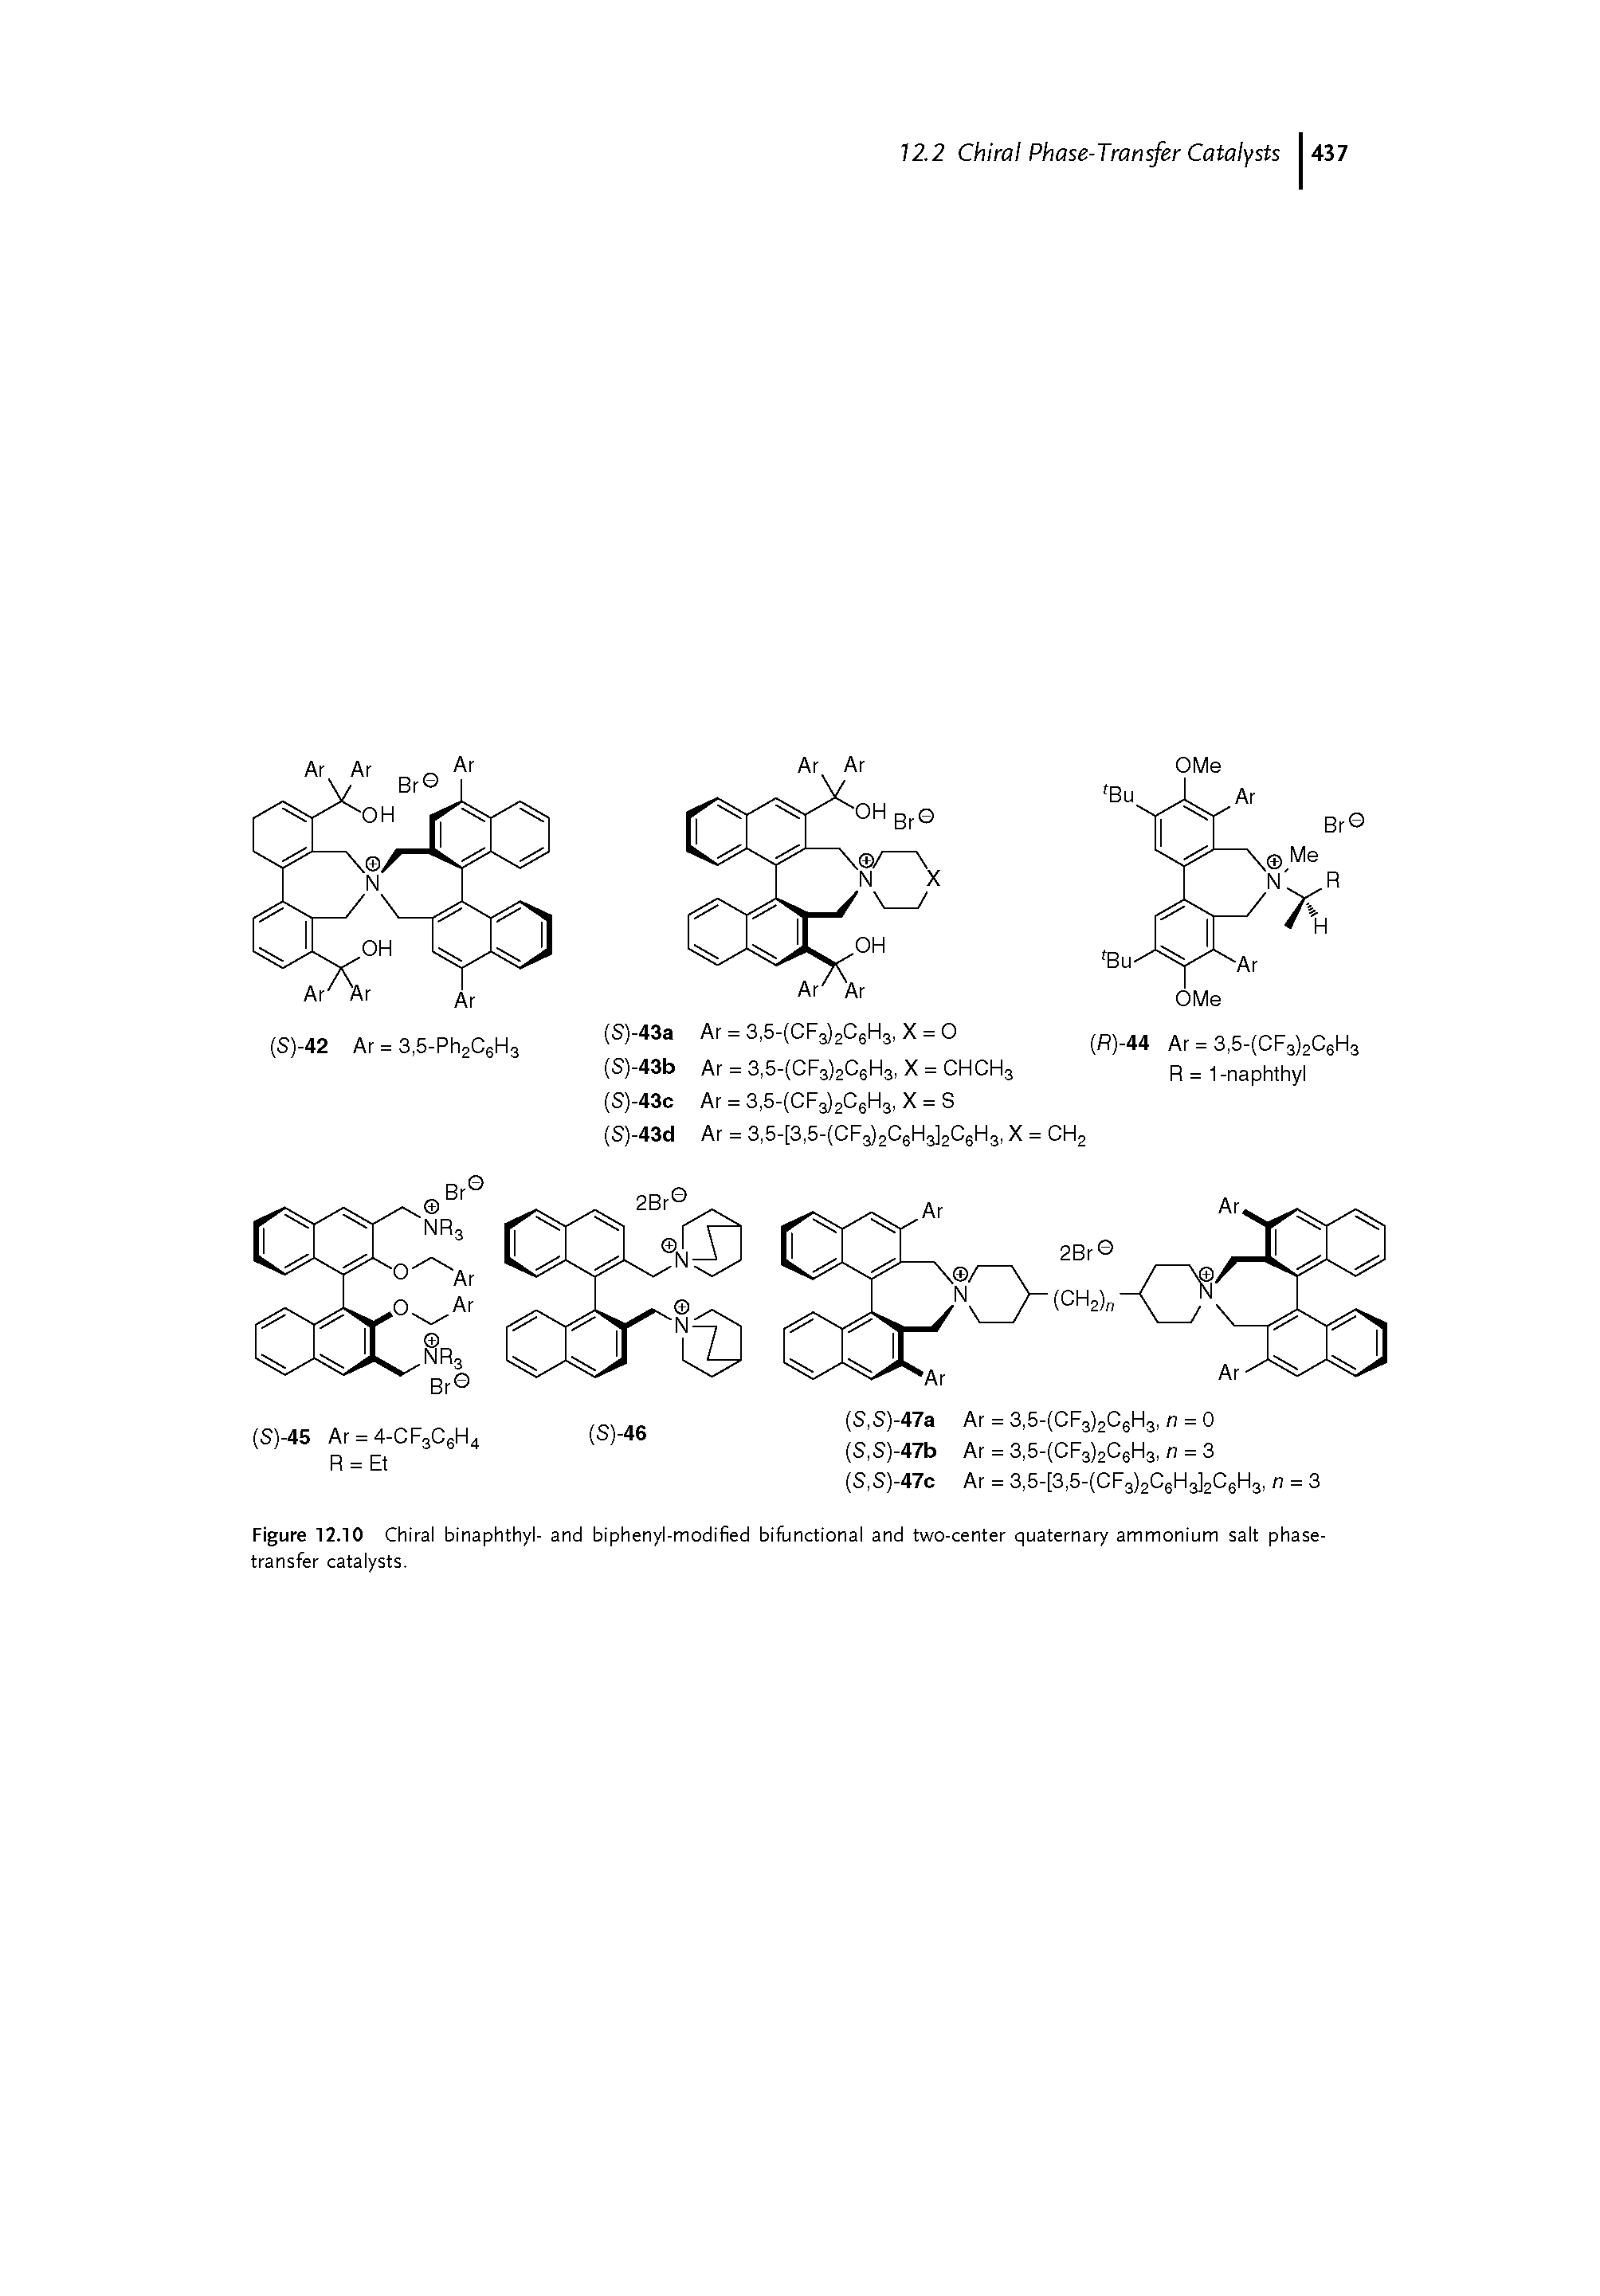 Figure 12.10 Chiral binaphthyl- and biphenyl-modified bifunctional and two-center quaternary ammonium salt phase-transfer catalysts.